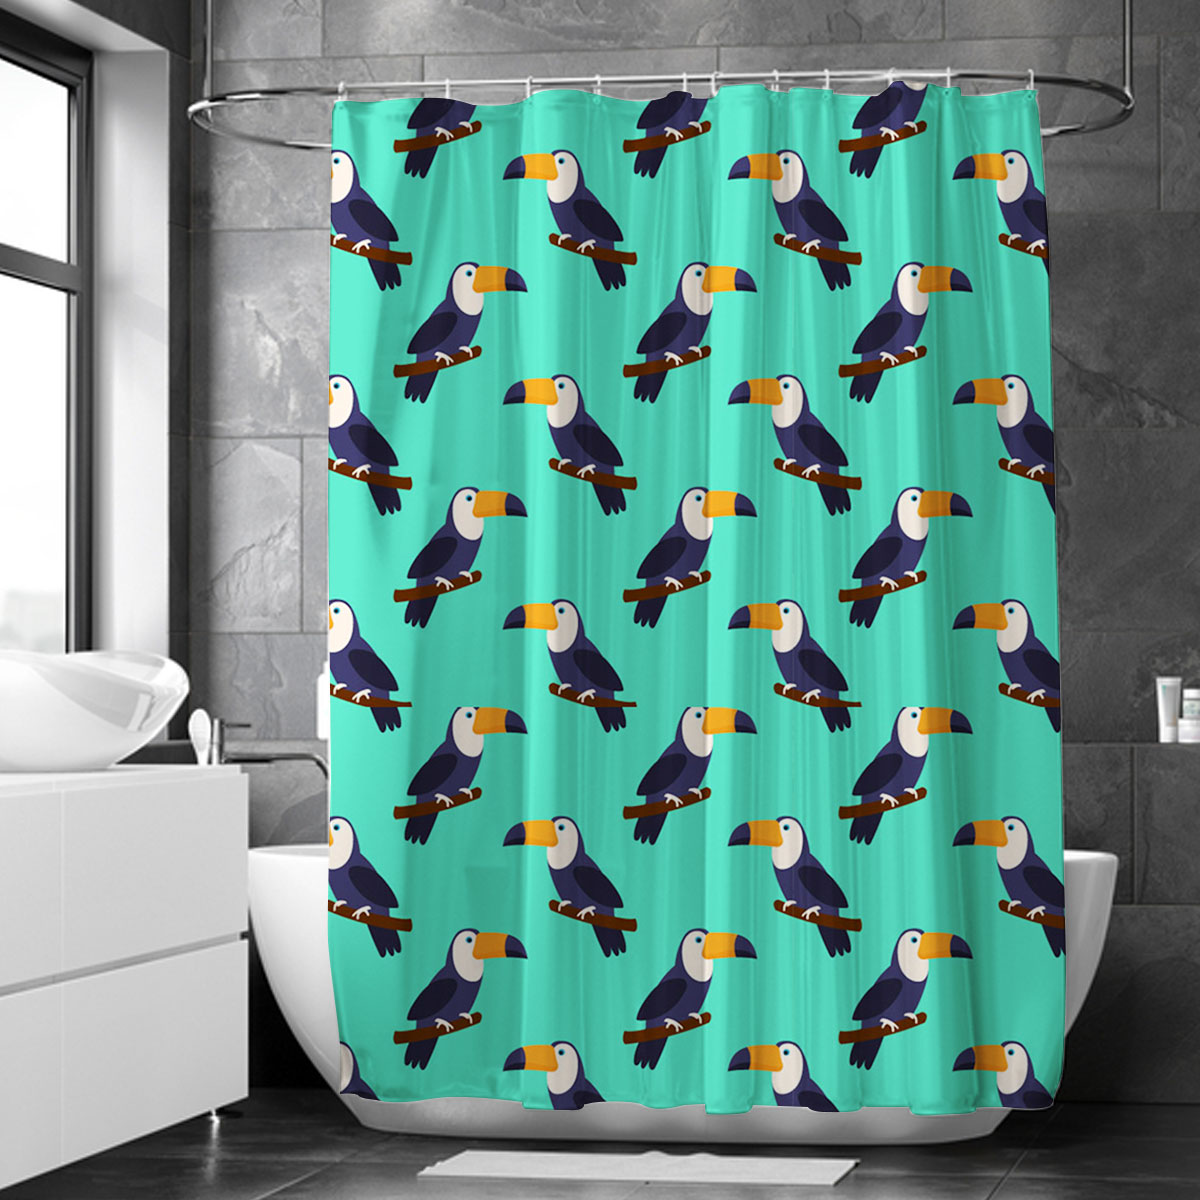 Monogram Coon Standing Toucan Shower Curtain